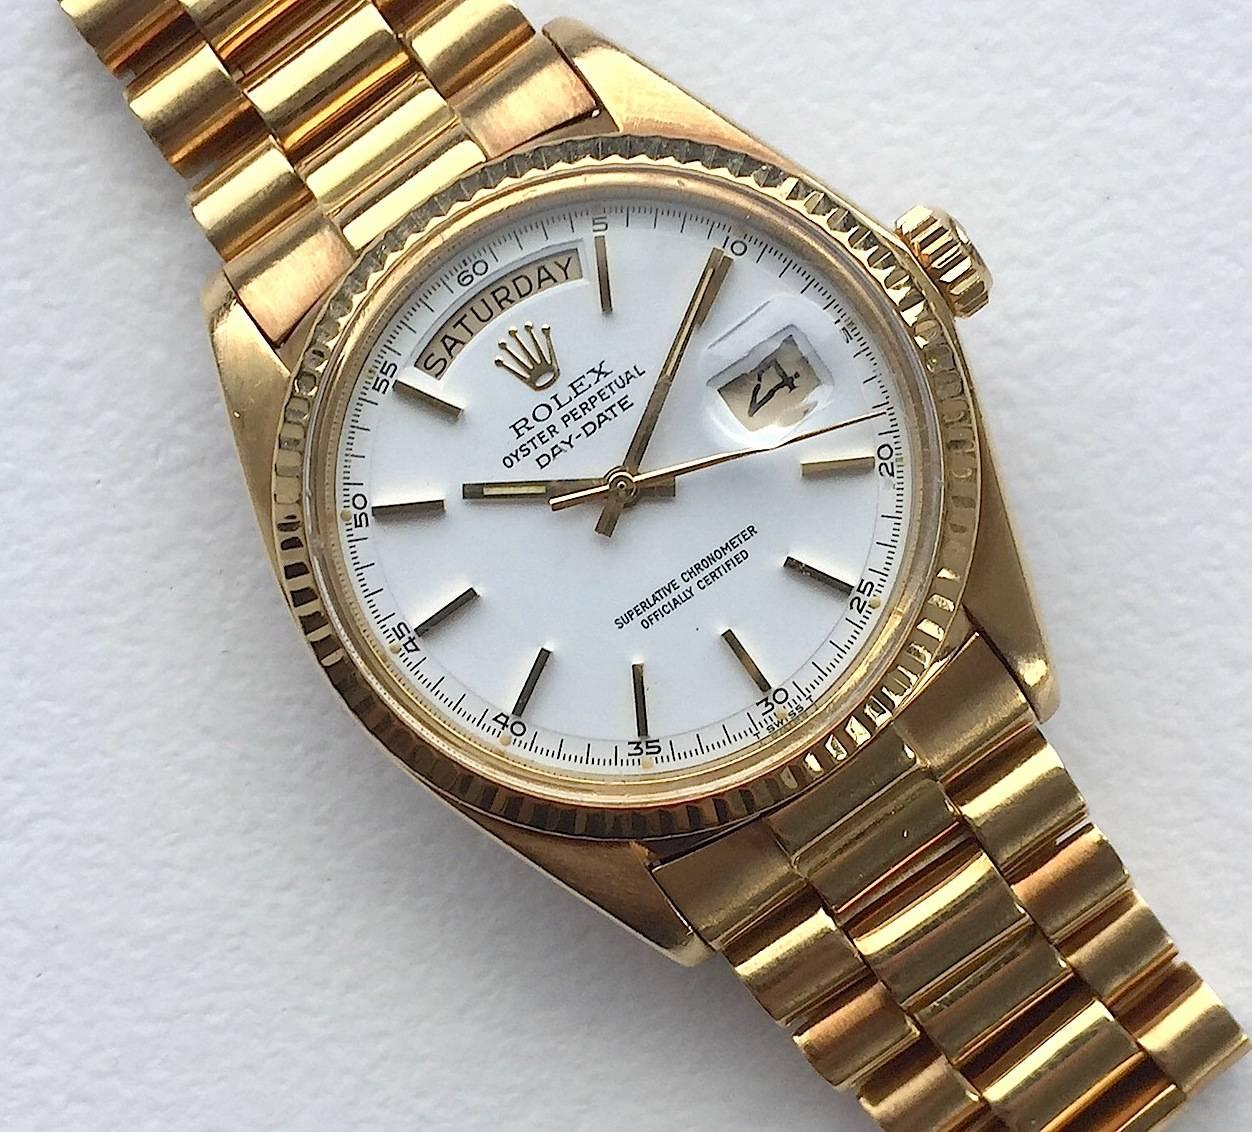 Rolex 18K Yellow Gold Day-Date Presidential Watch from the 1970's
Beautiful Factory White Dial with Applied Yellow Hour Markers and Minute Track Around Perimeter
Yellow Gold Gold Fluted Bezel
18K Yellow Gold Case
36mm in size 
Features Rolex